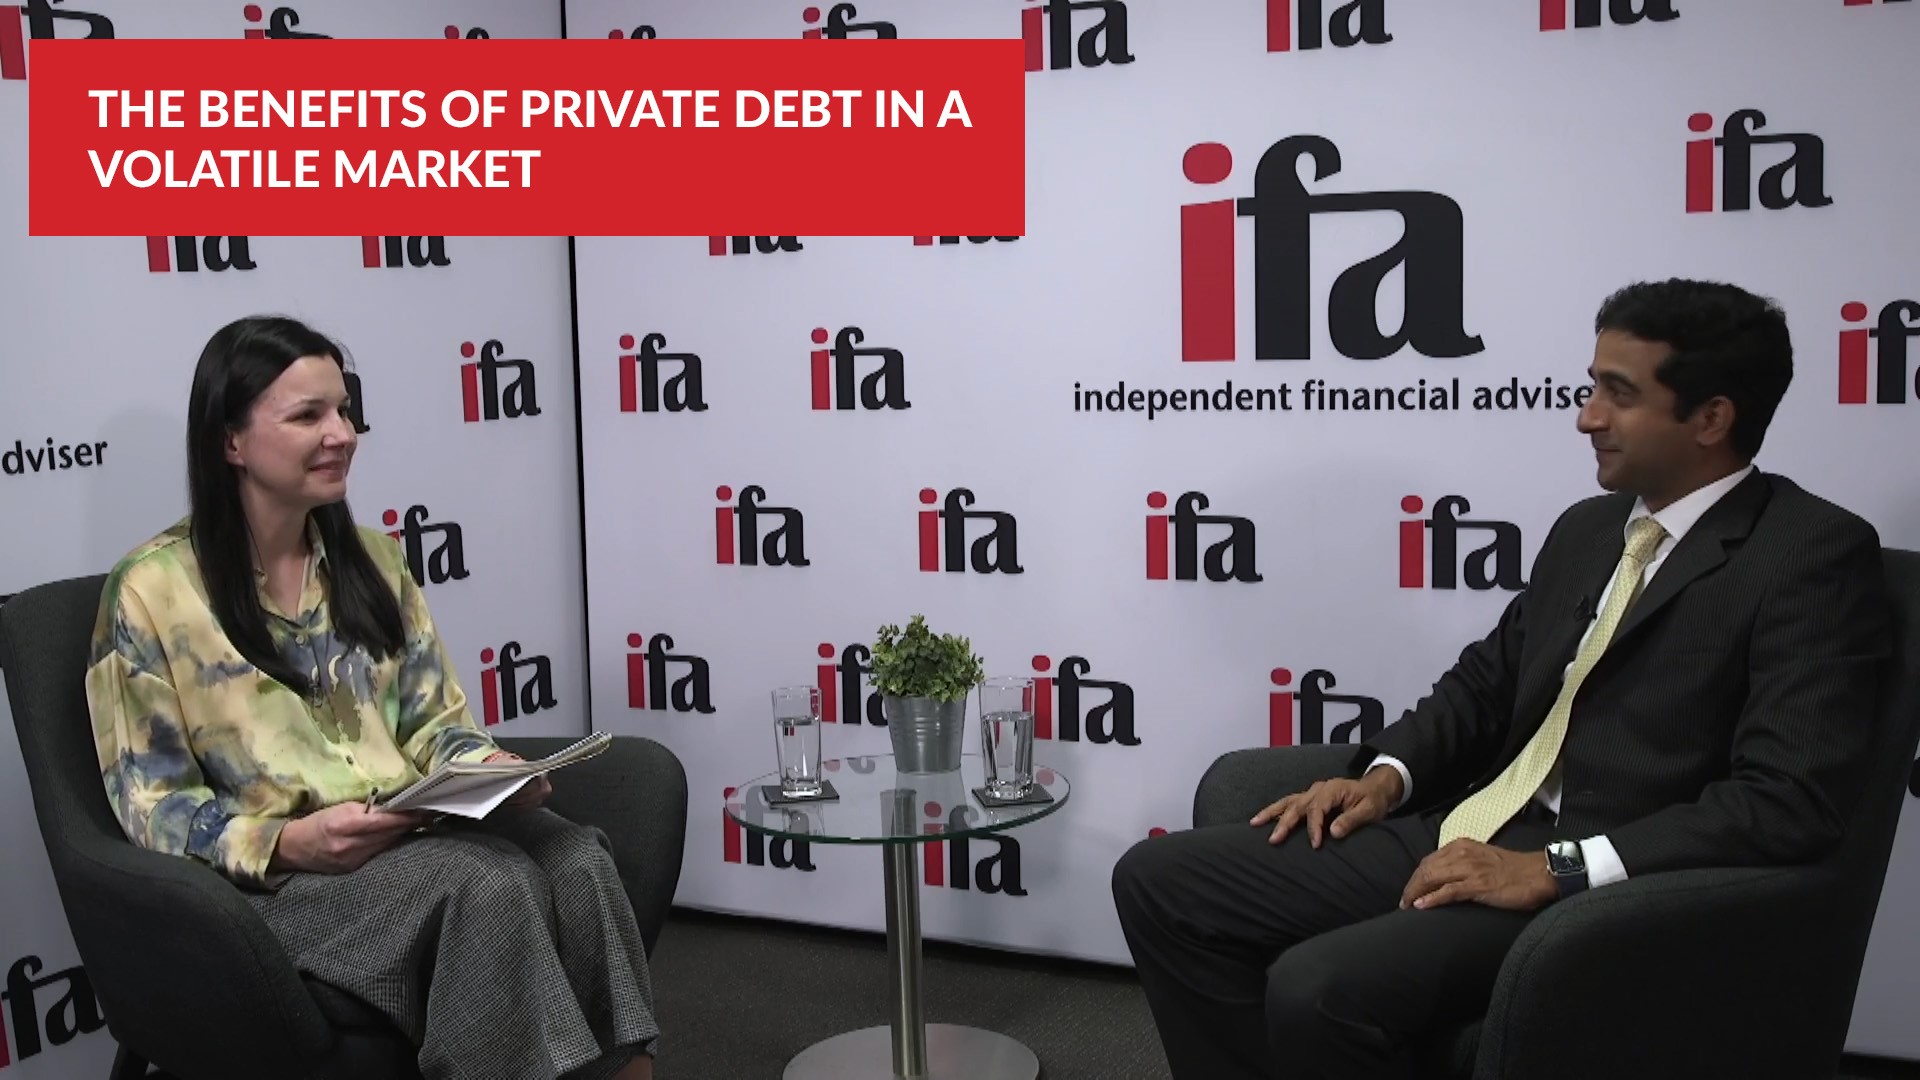 The benefits of private debt in a volatile market